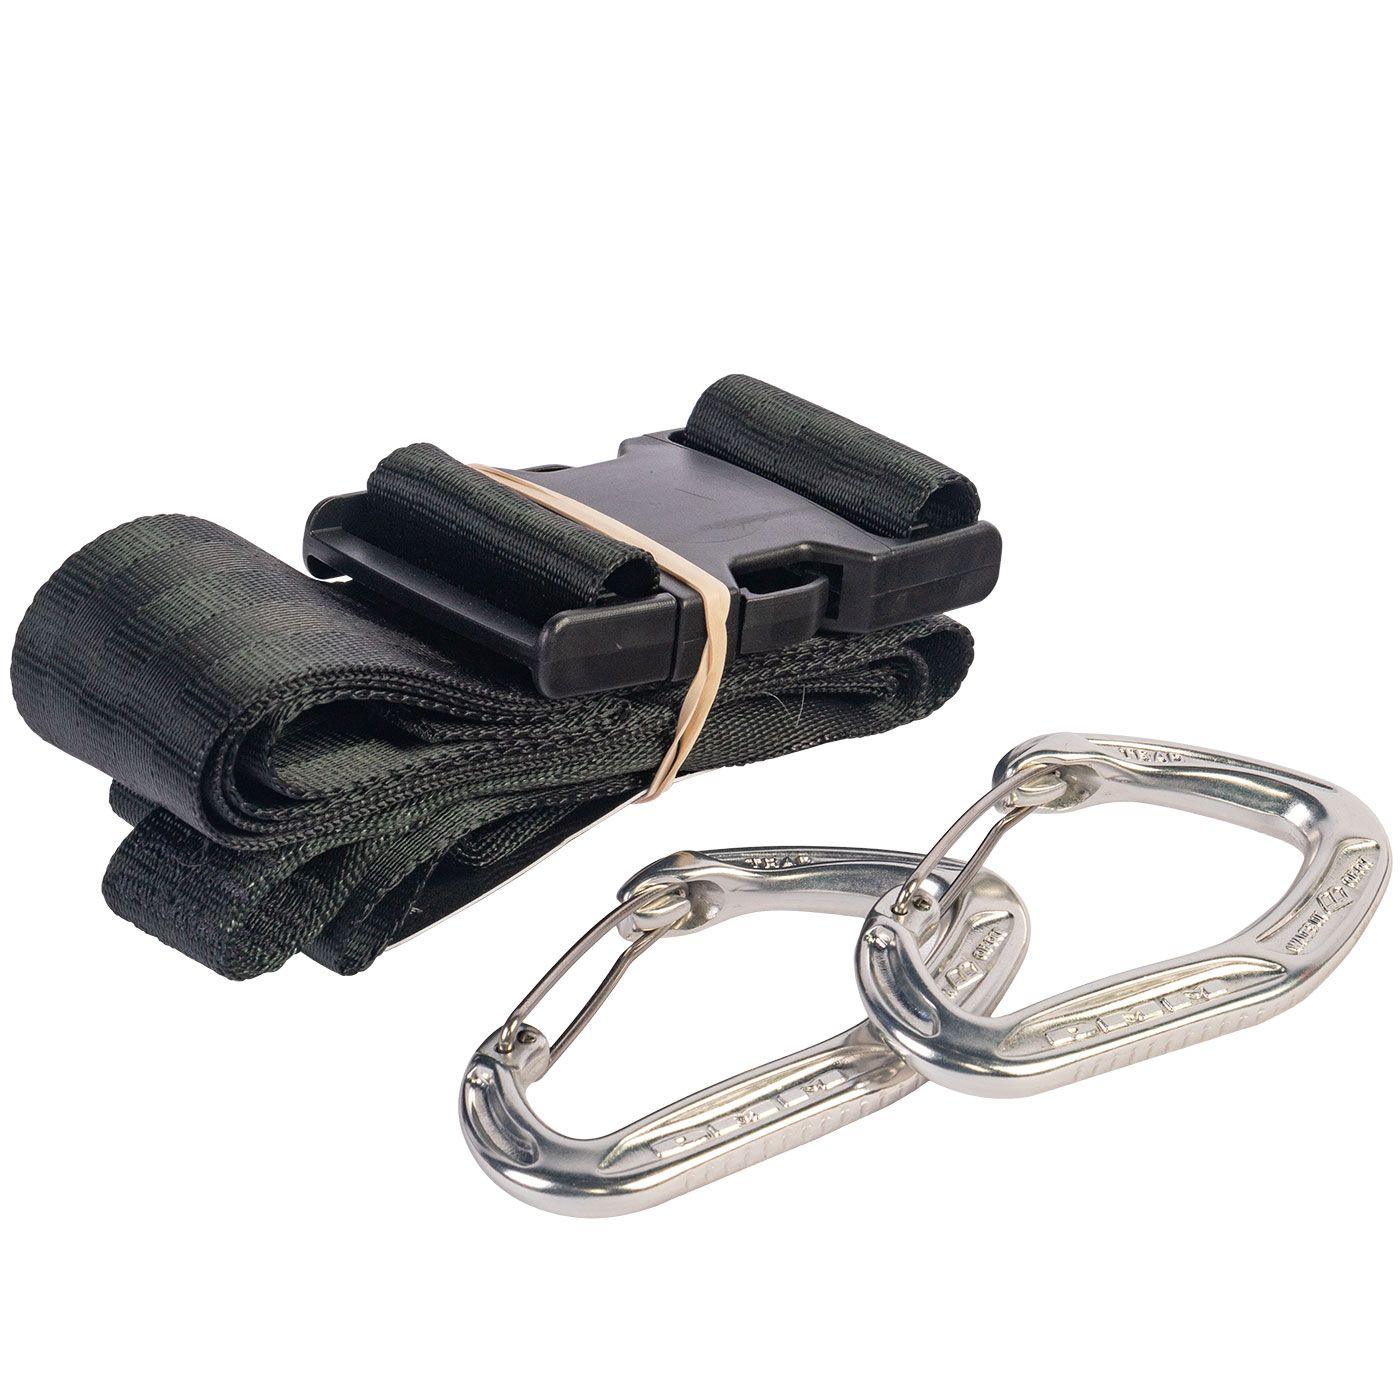 NAR K-9 LITTER  NAR K-9 LITTER WITH CARRY STRAP AND CARABINERS - Techline Trauma